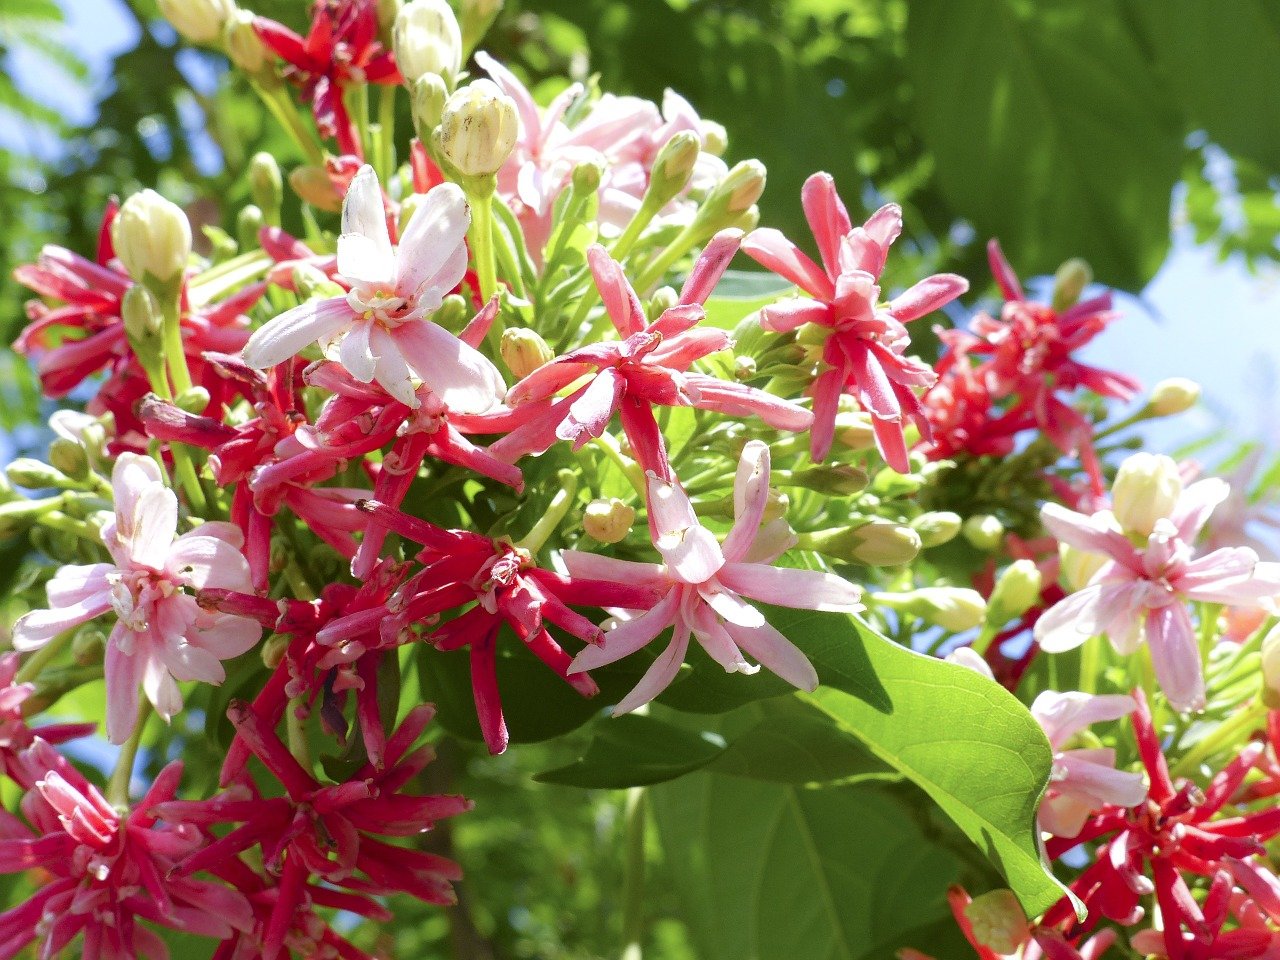 Madhumalti Plant: Easy to care plants with pleasantly scented flowers